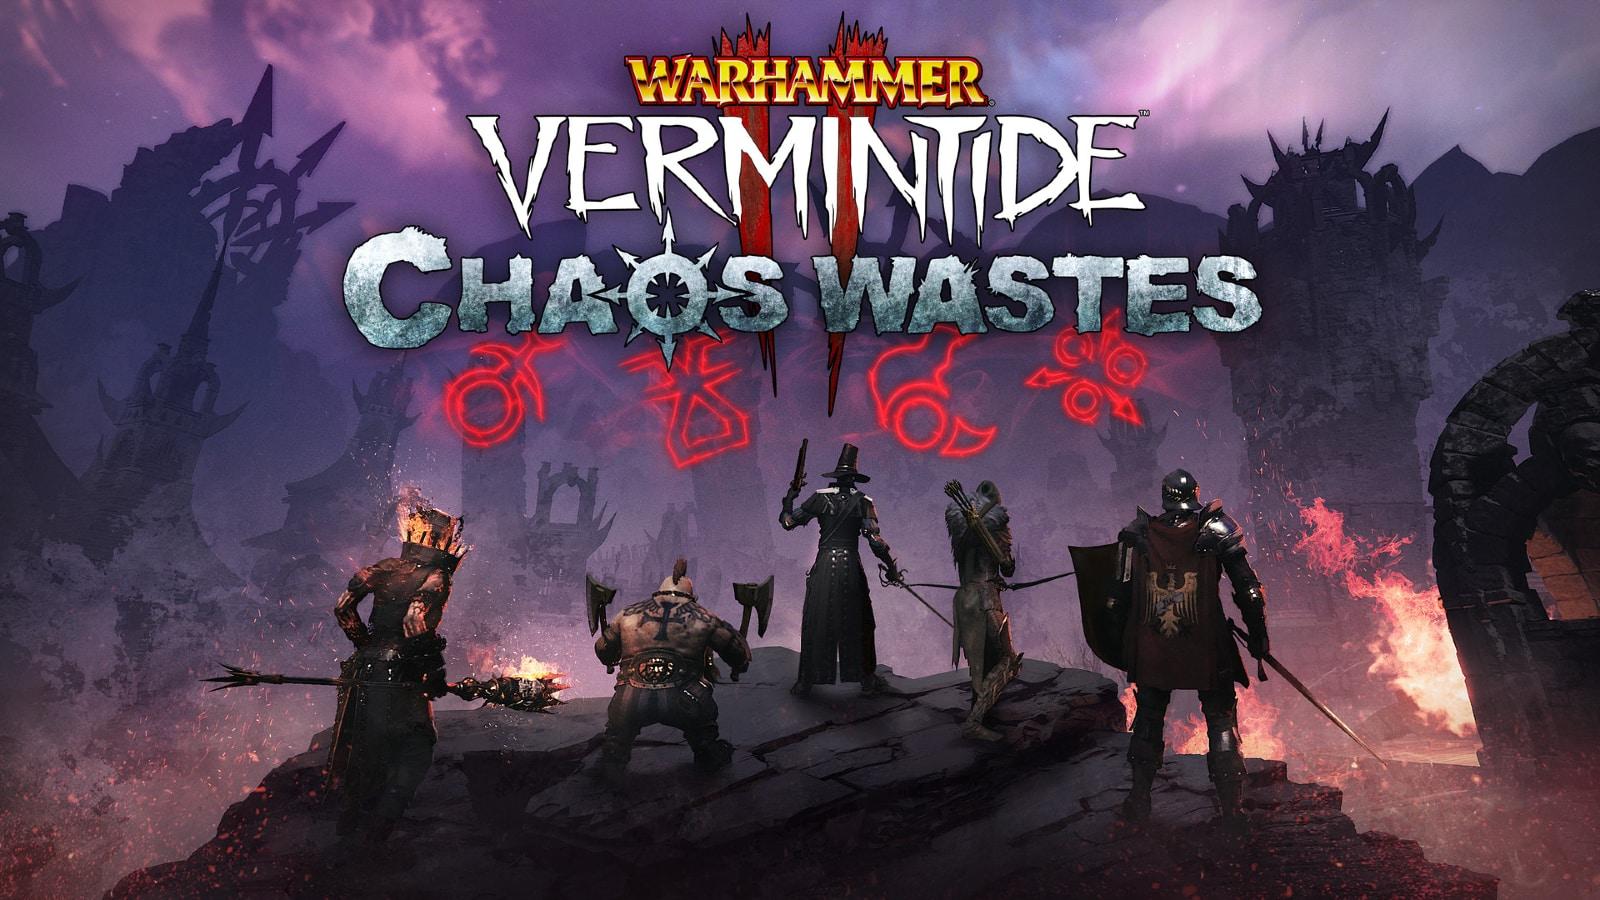 Chaos Wastes expansion in Warhmmer Vermintide 2